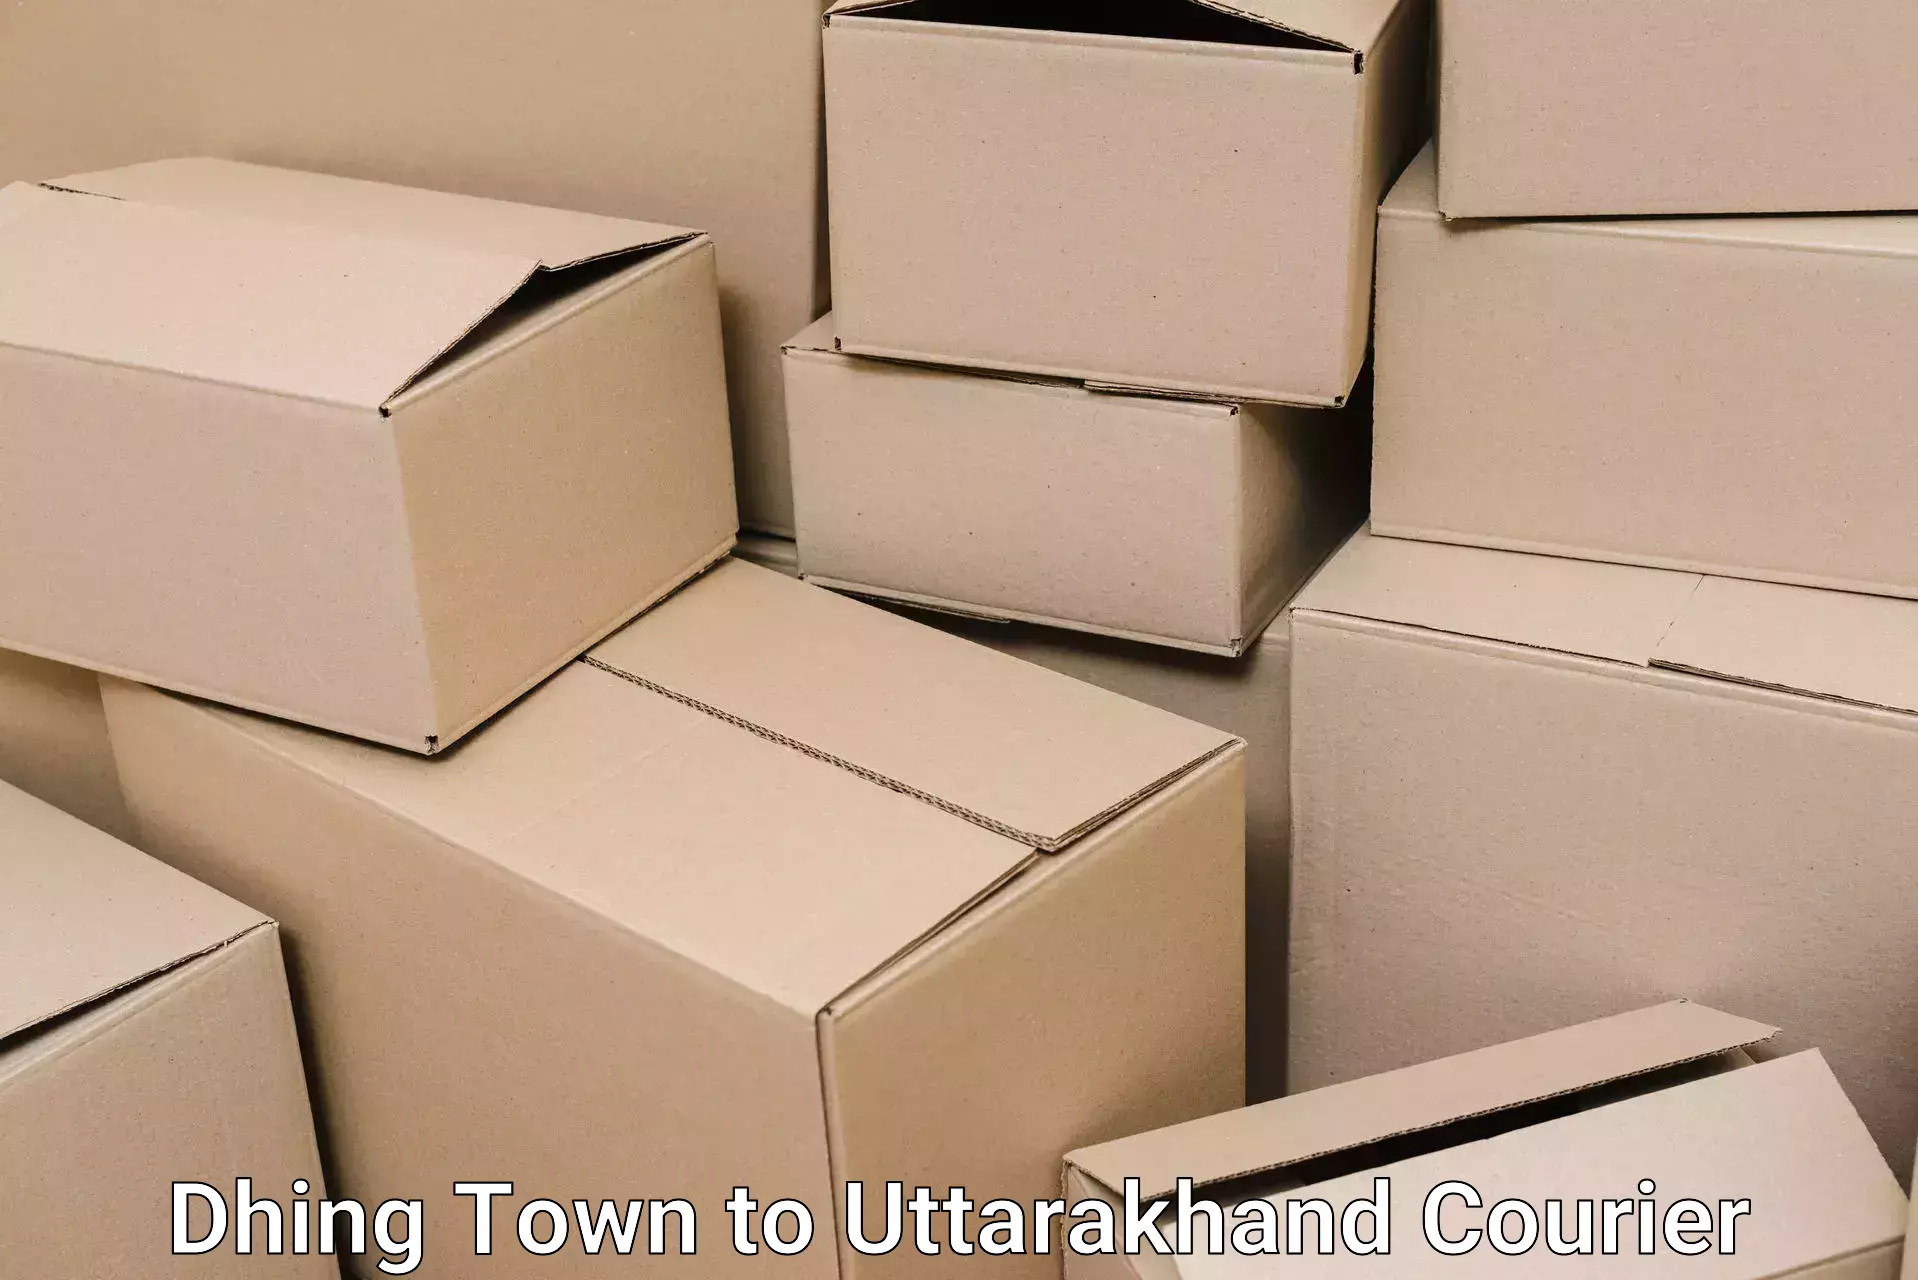 Trusted relocation services Dhing Town to Uttarakhand